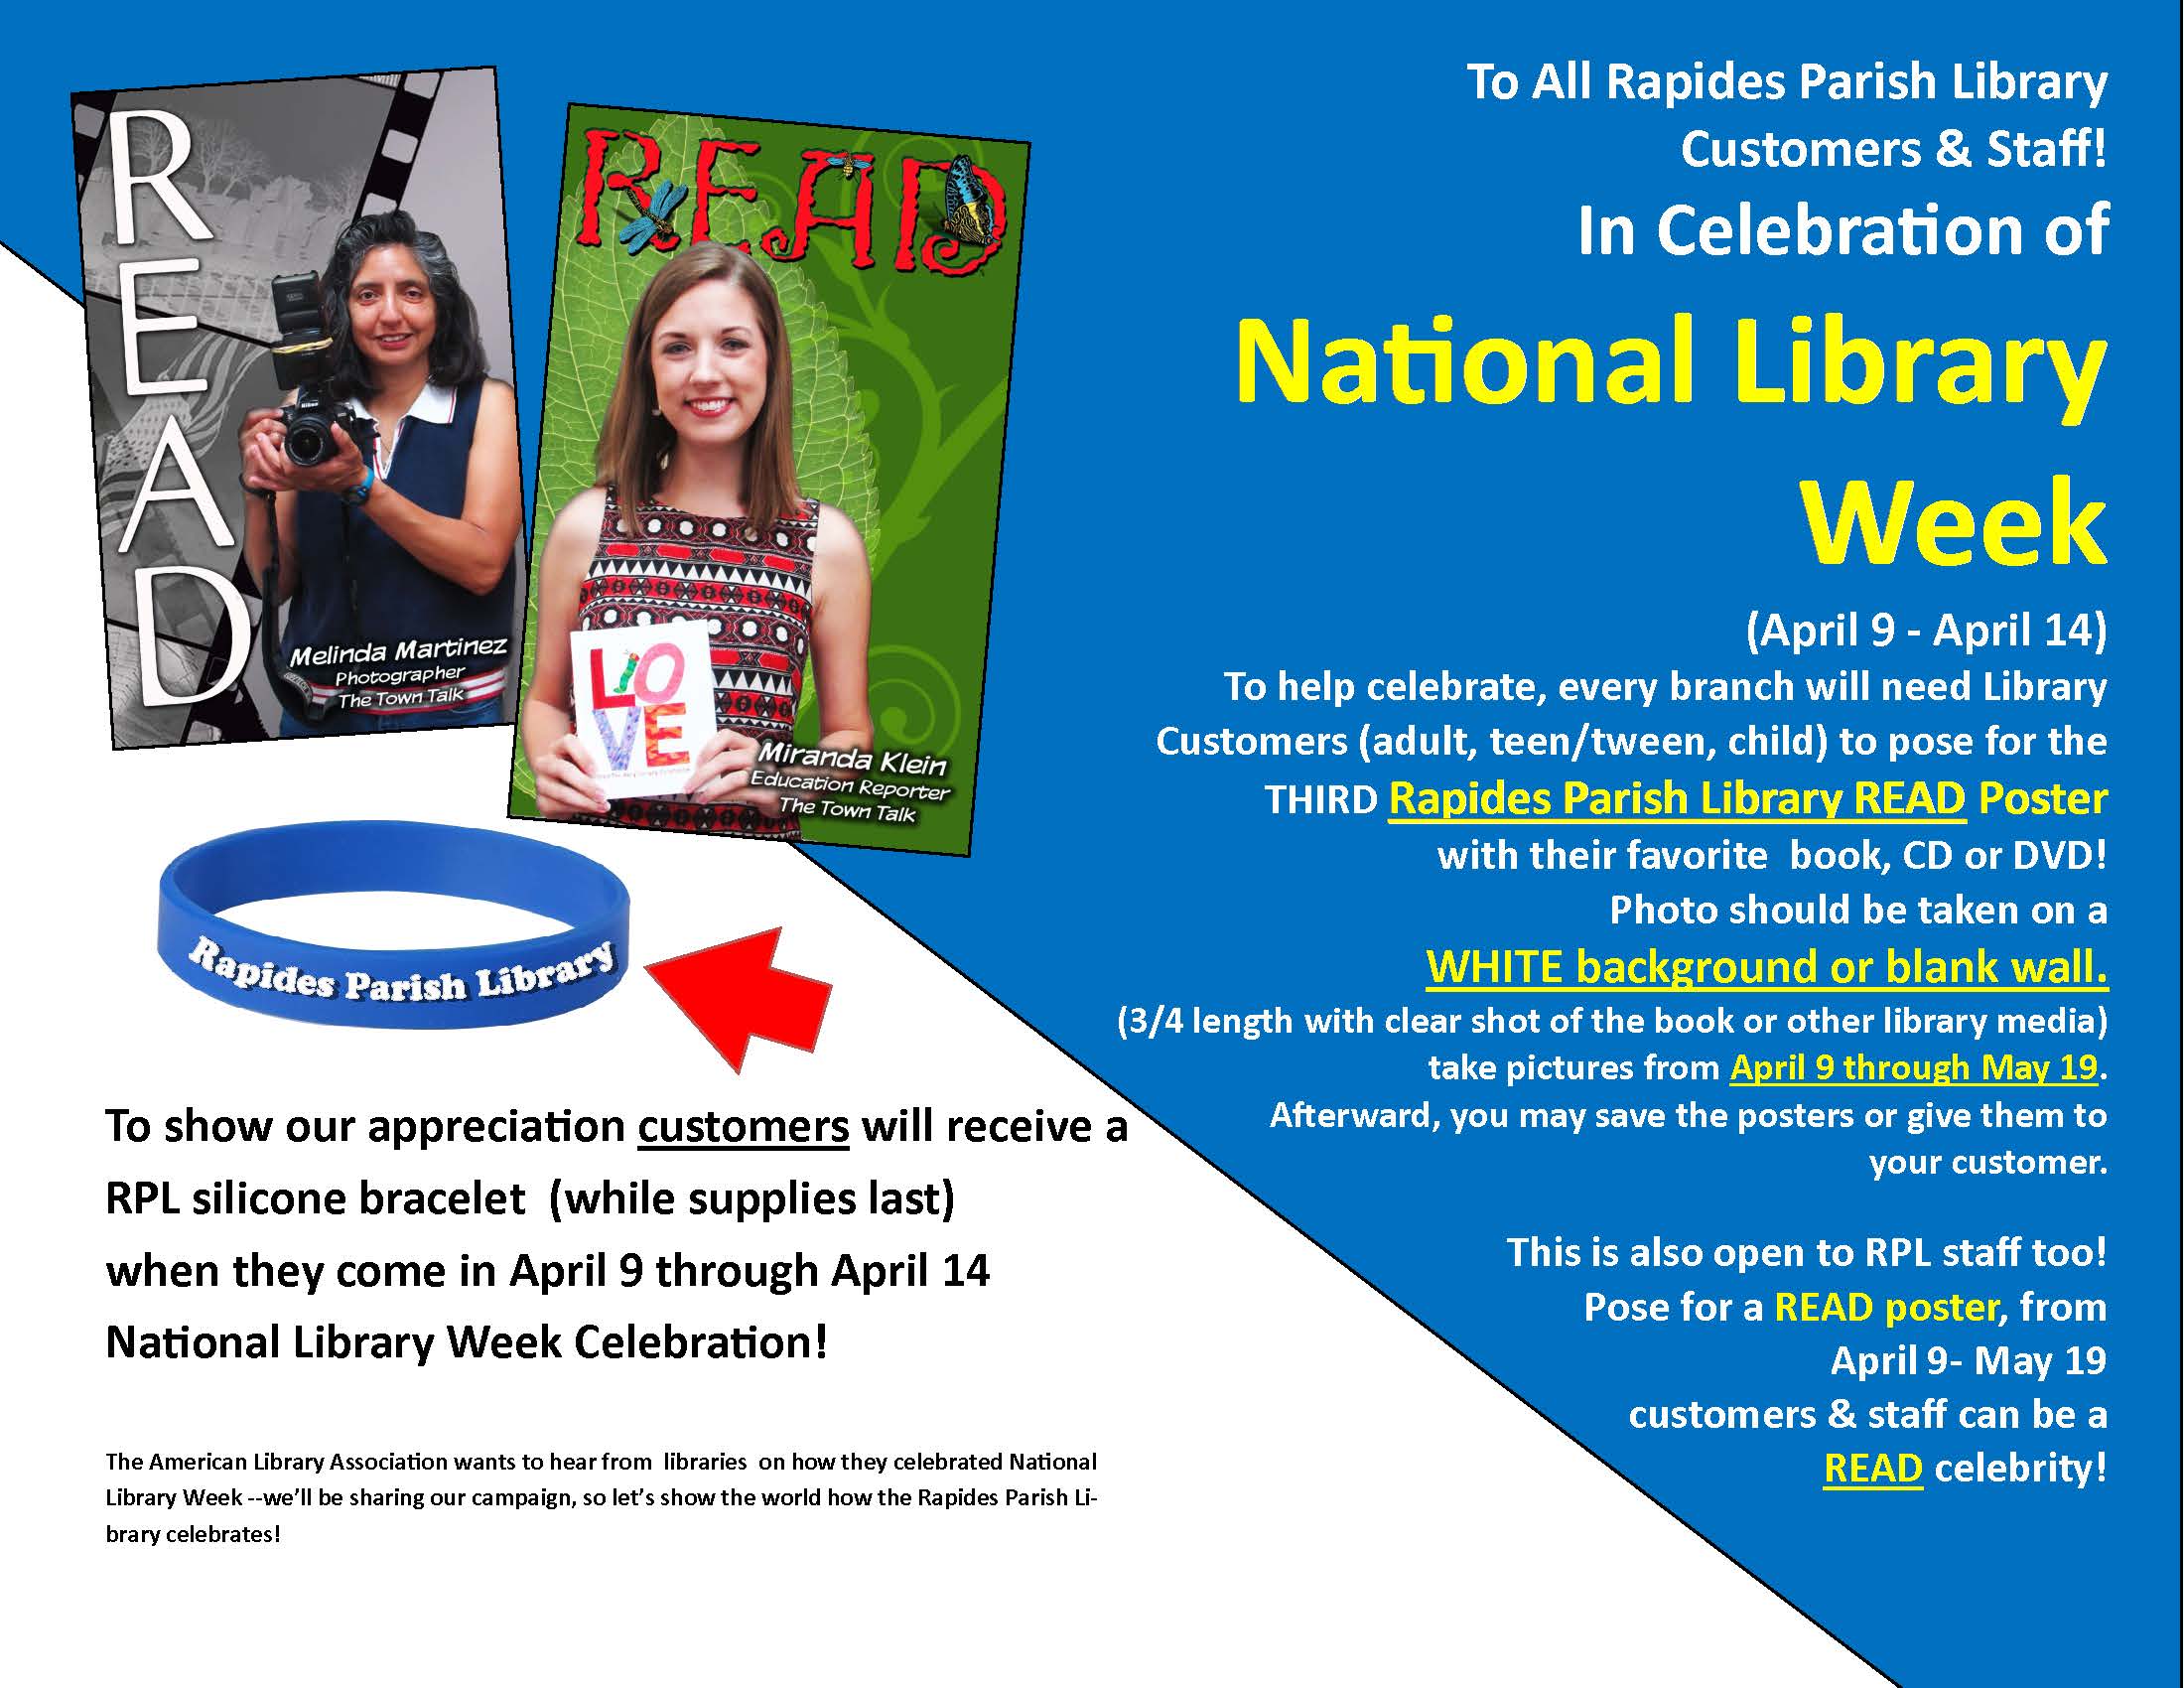 3rd Annual National Library Celebrity READ Poster Campaign